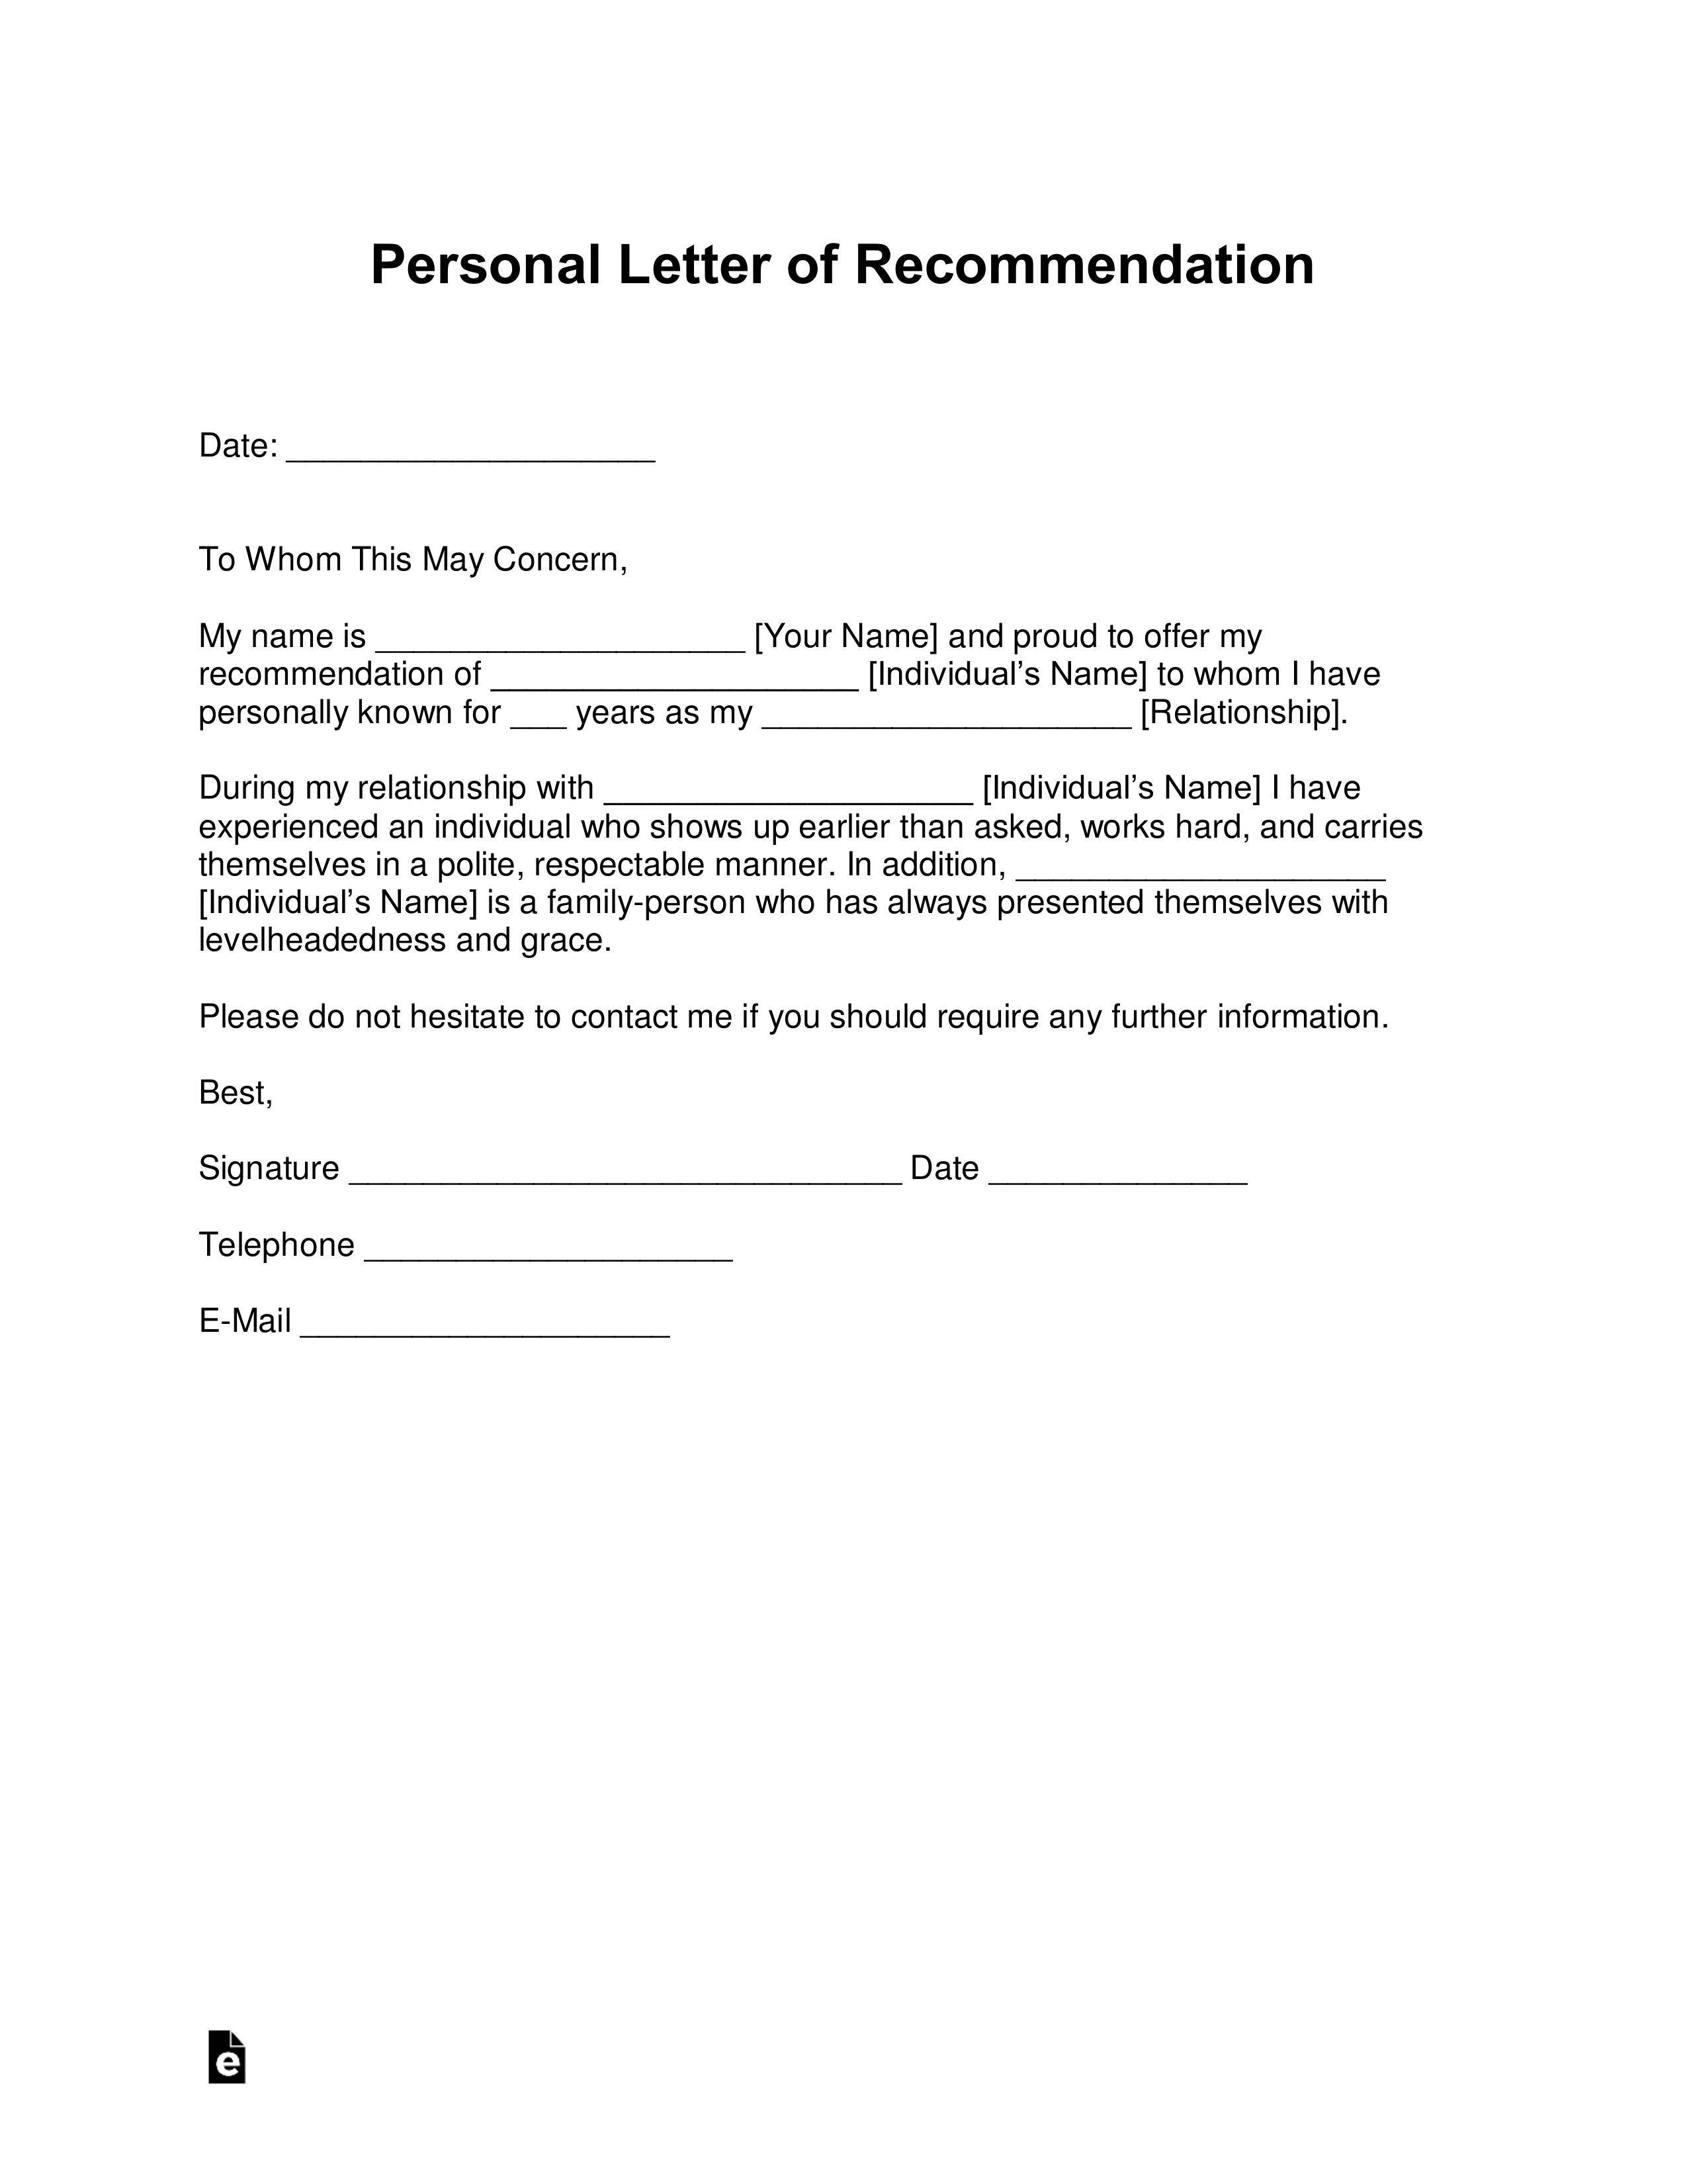 Letter Of Recommendation Layout from eforms.com